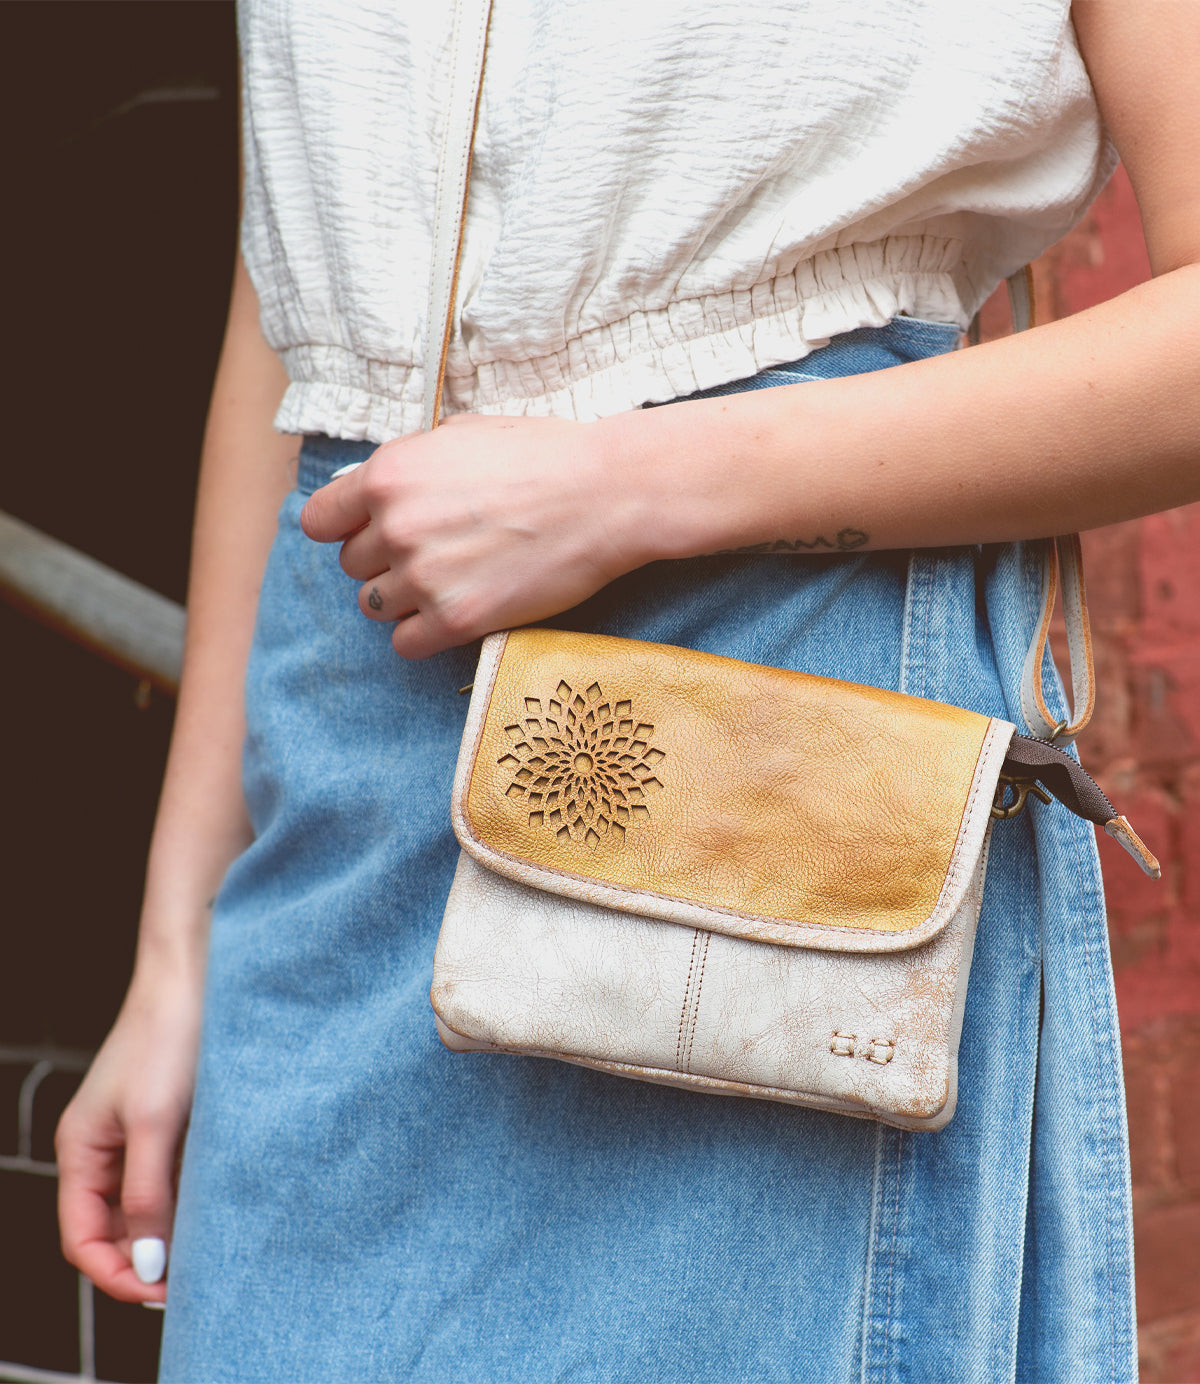 A woman wearing a denim skirt and carrying a stylish Bed Stu Ziggy II crossbody bag with compartments.